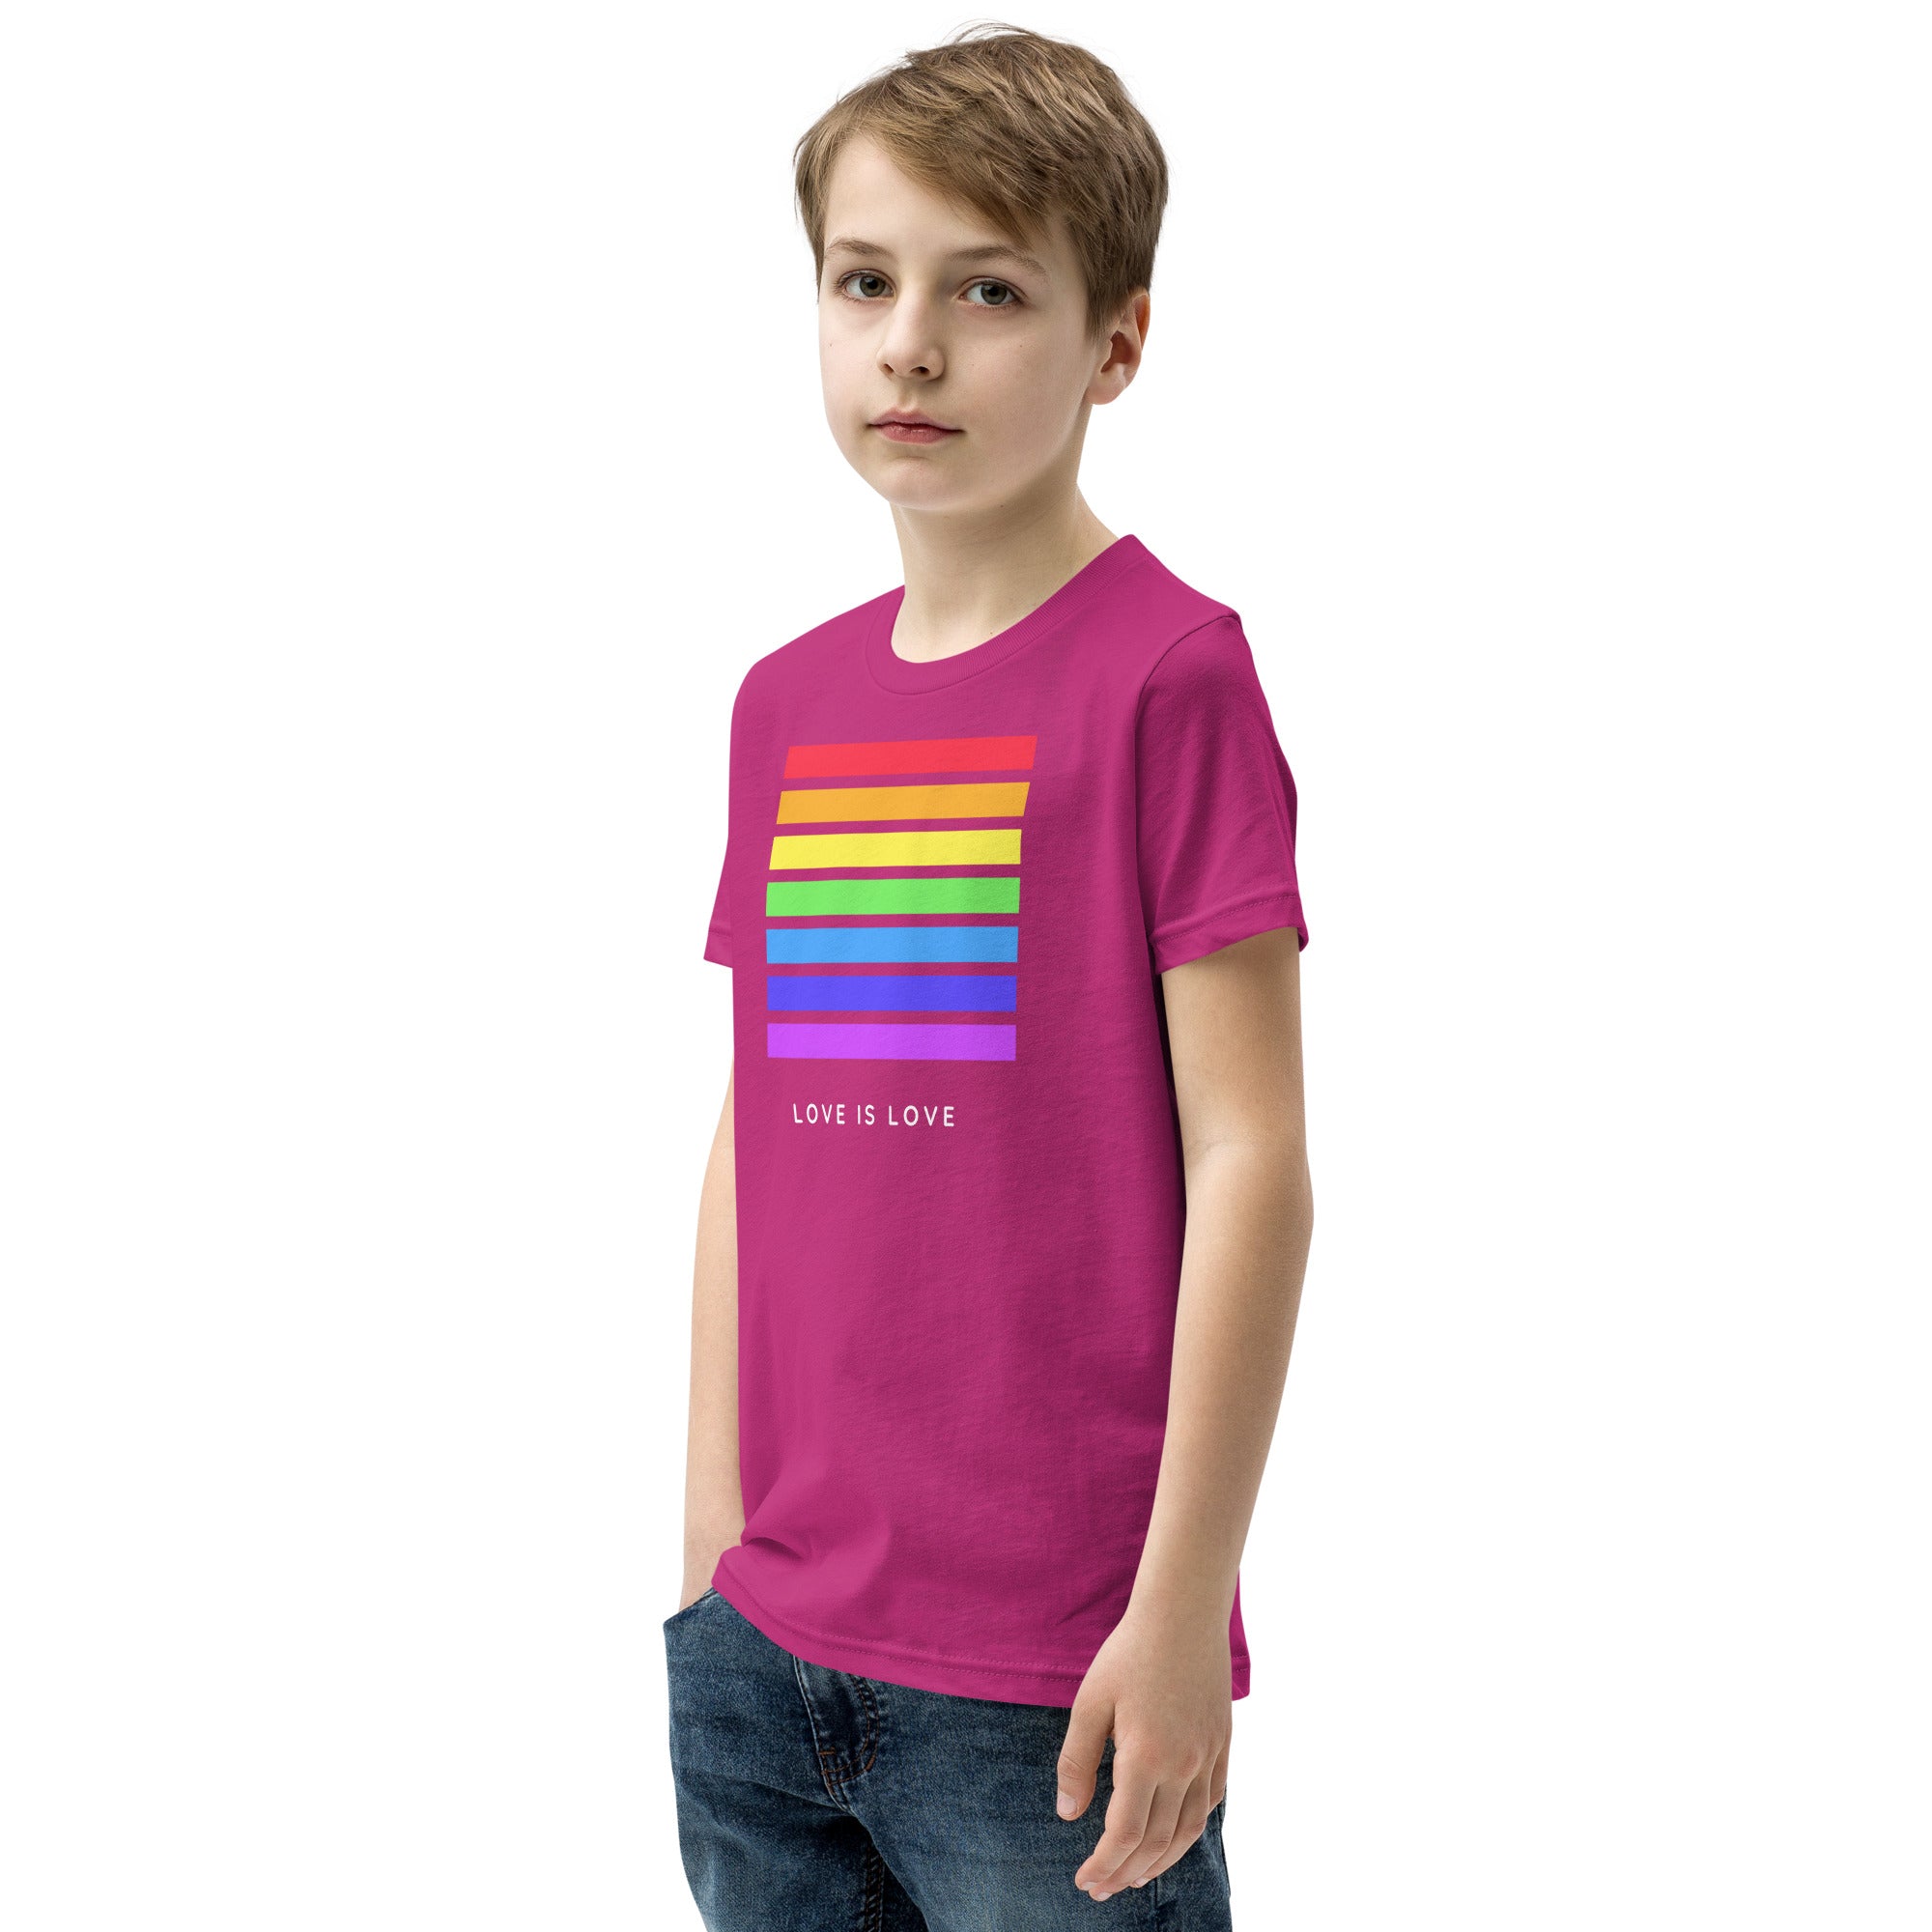 Love Is Love - Youth Short Sleeve T-Shirt